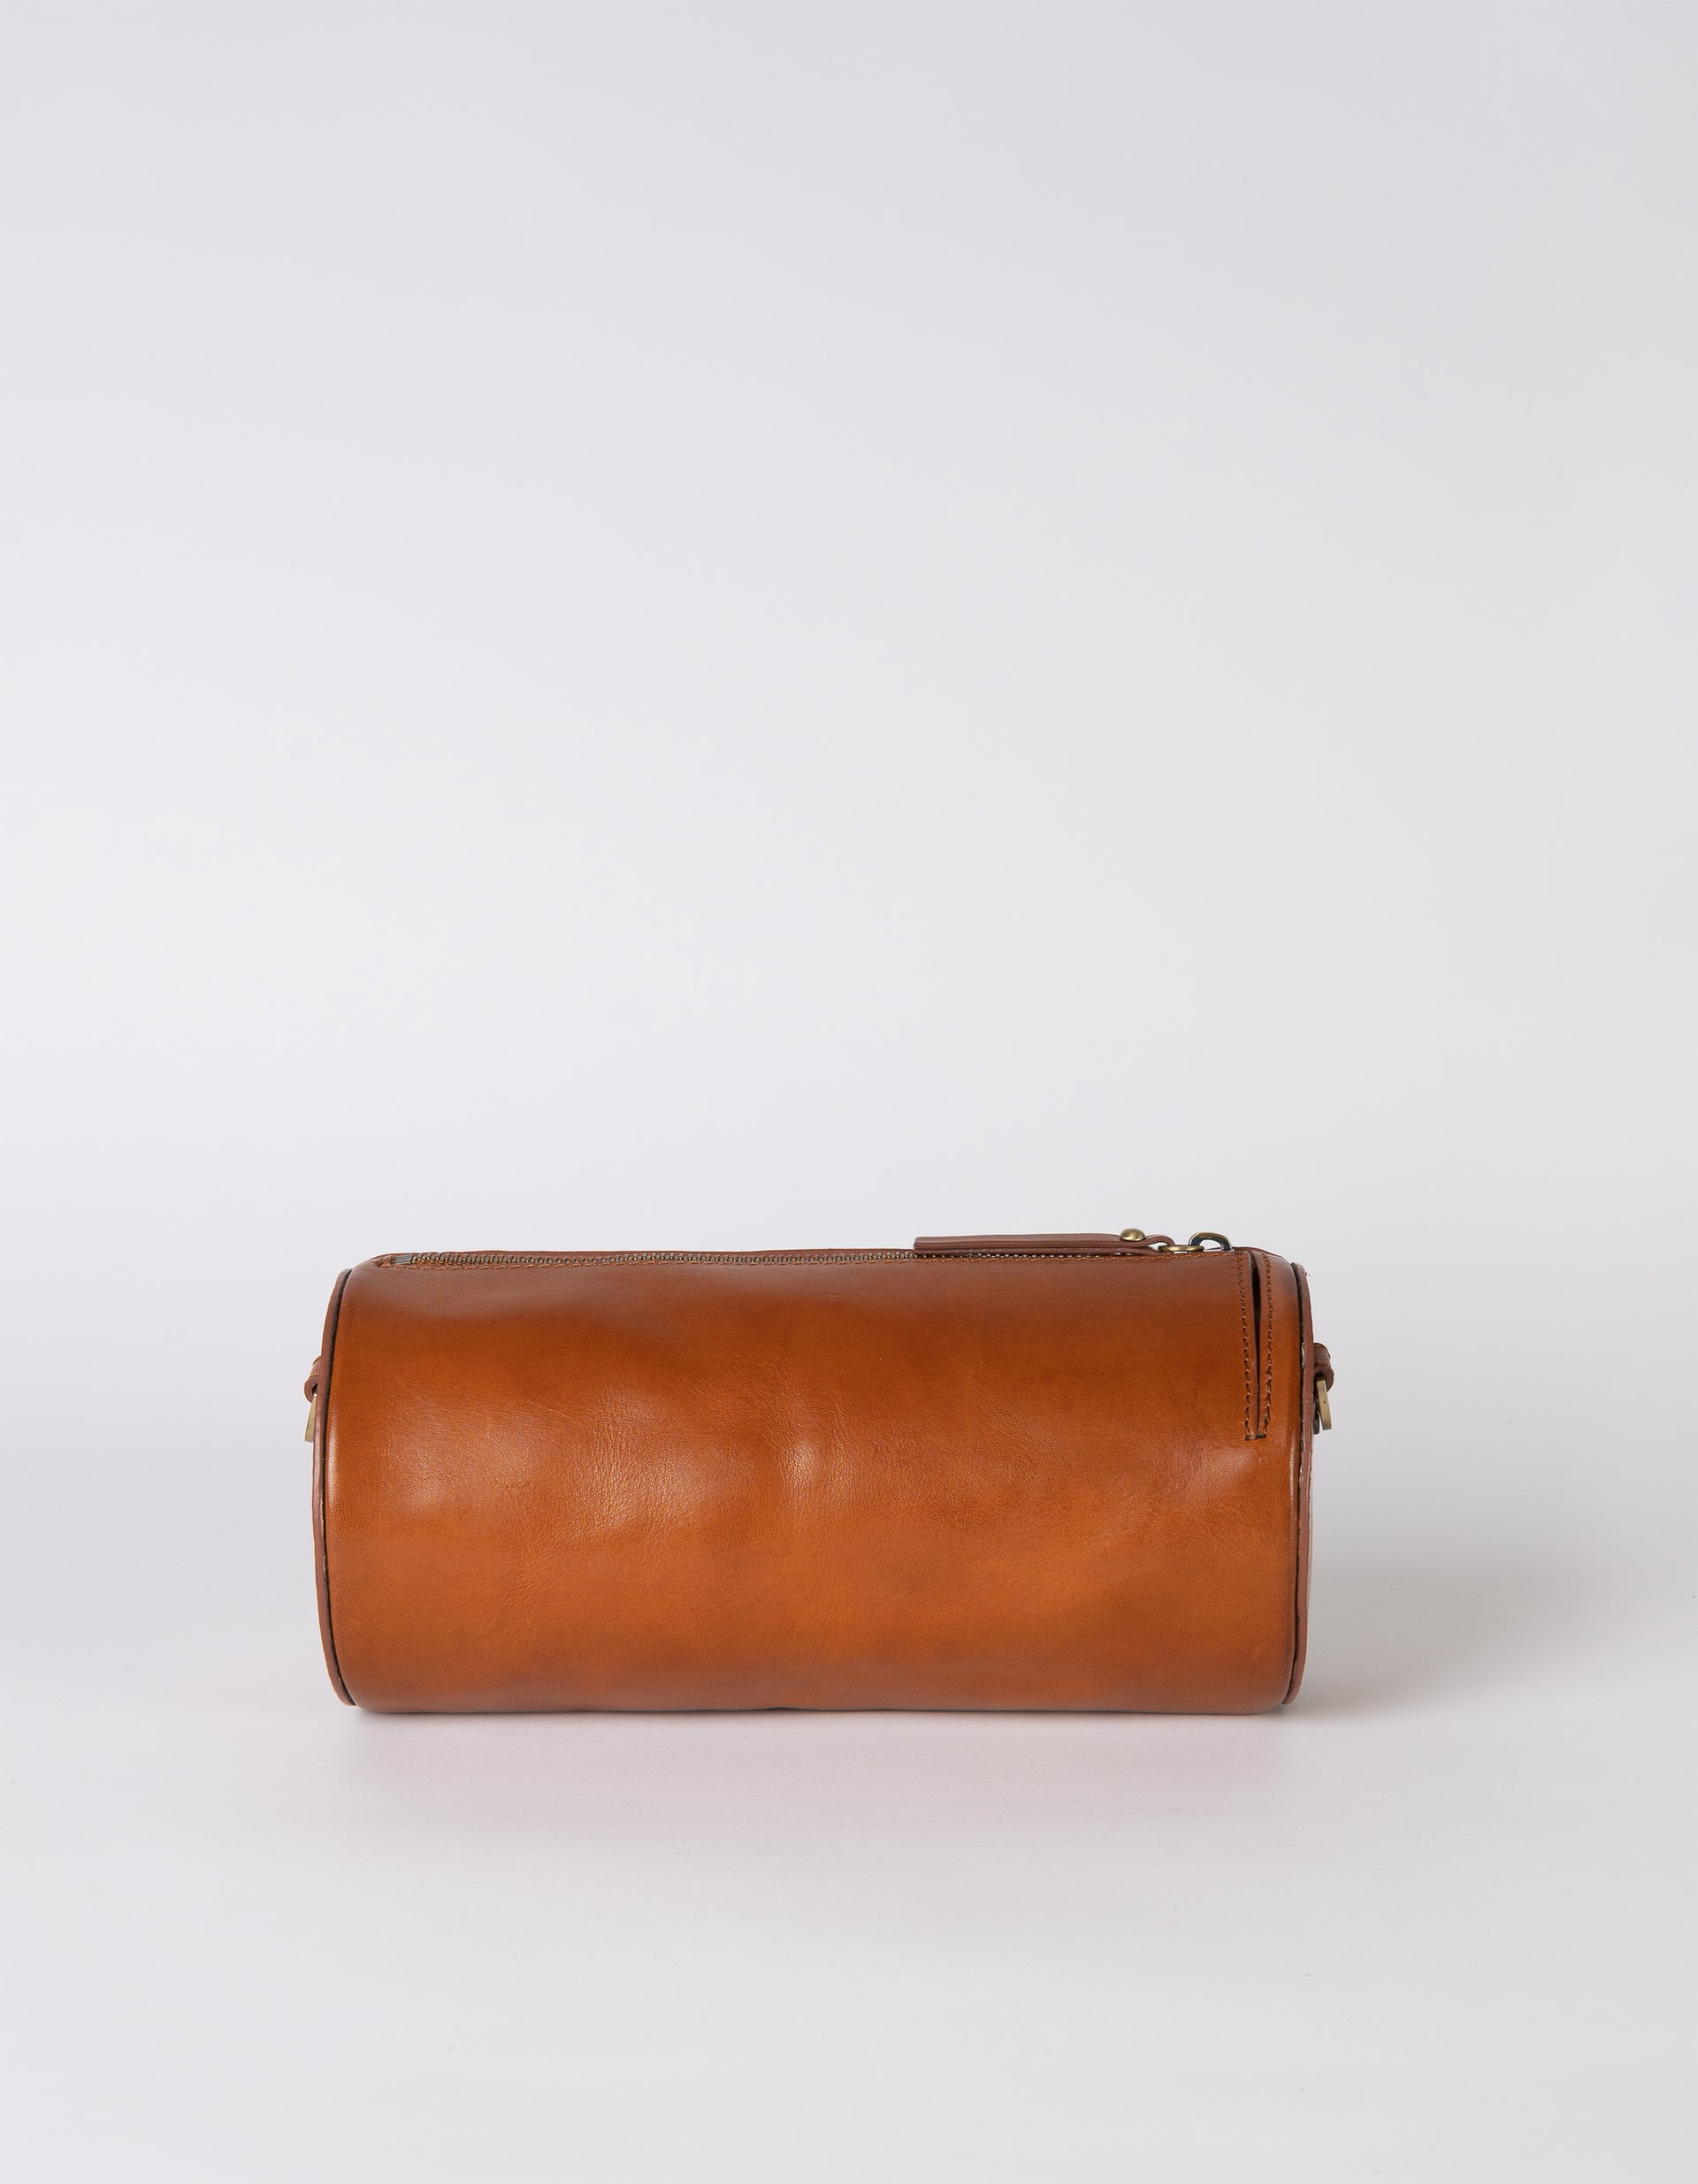 Izzy bag in cognac classic leather - back image